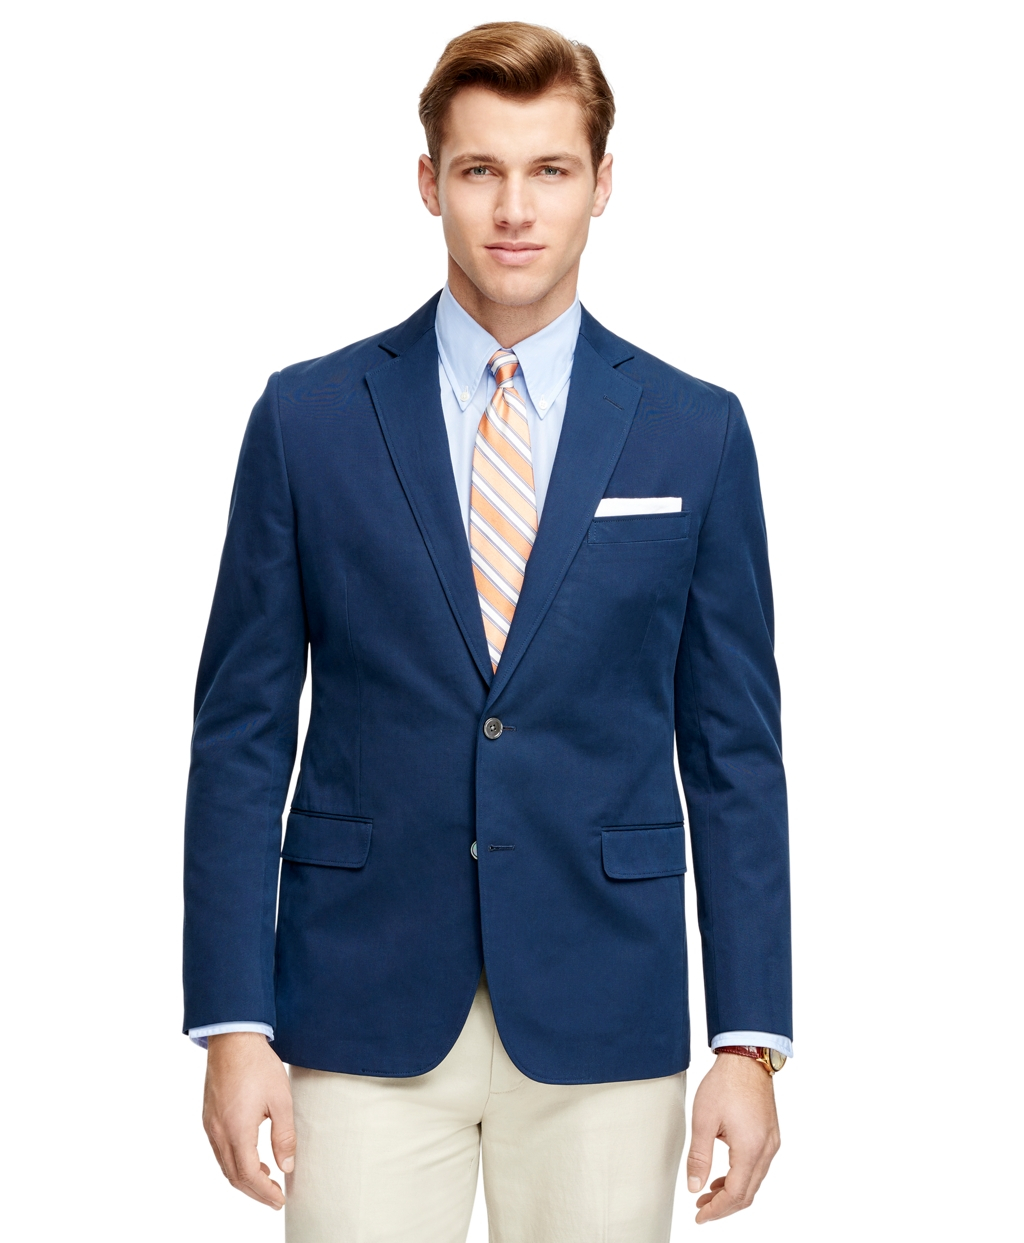 Lyst - Brooks Brothers Fitzgerald Fit Two-button Cotton Blazer in Blue ...